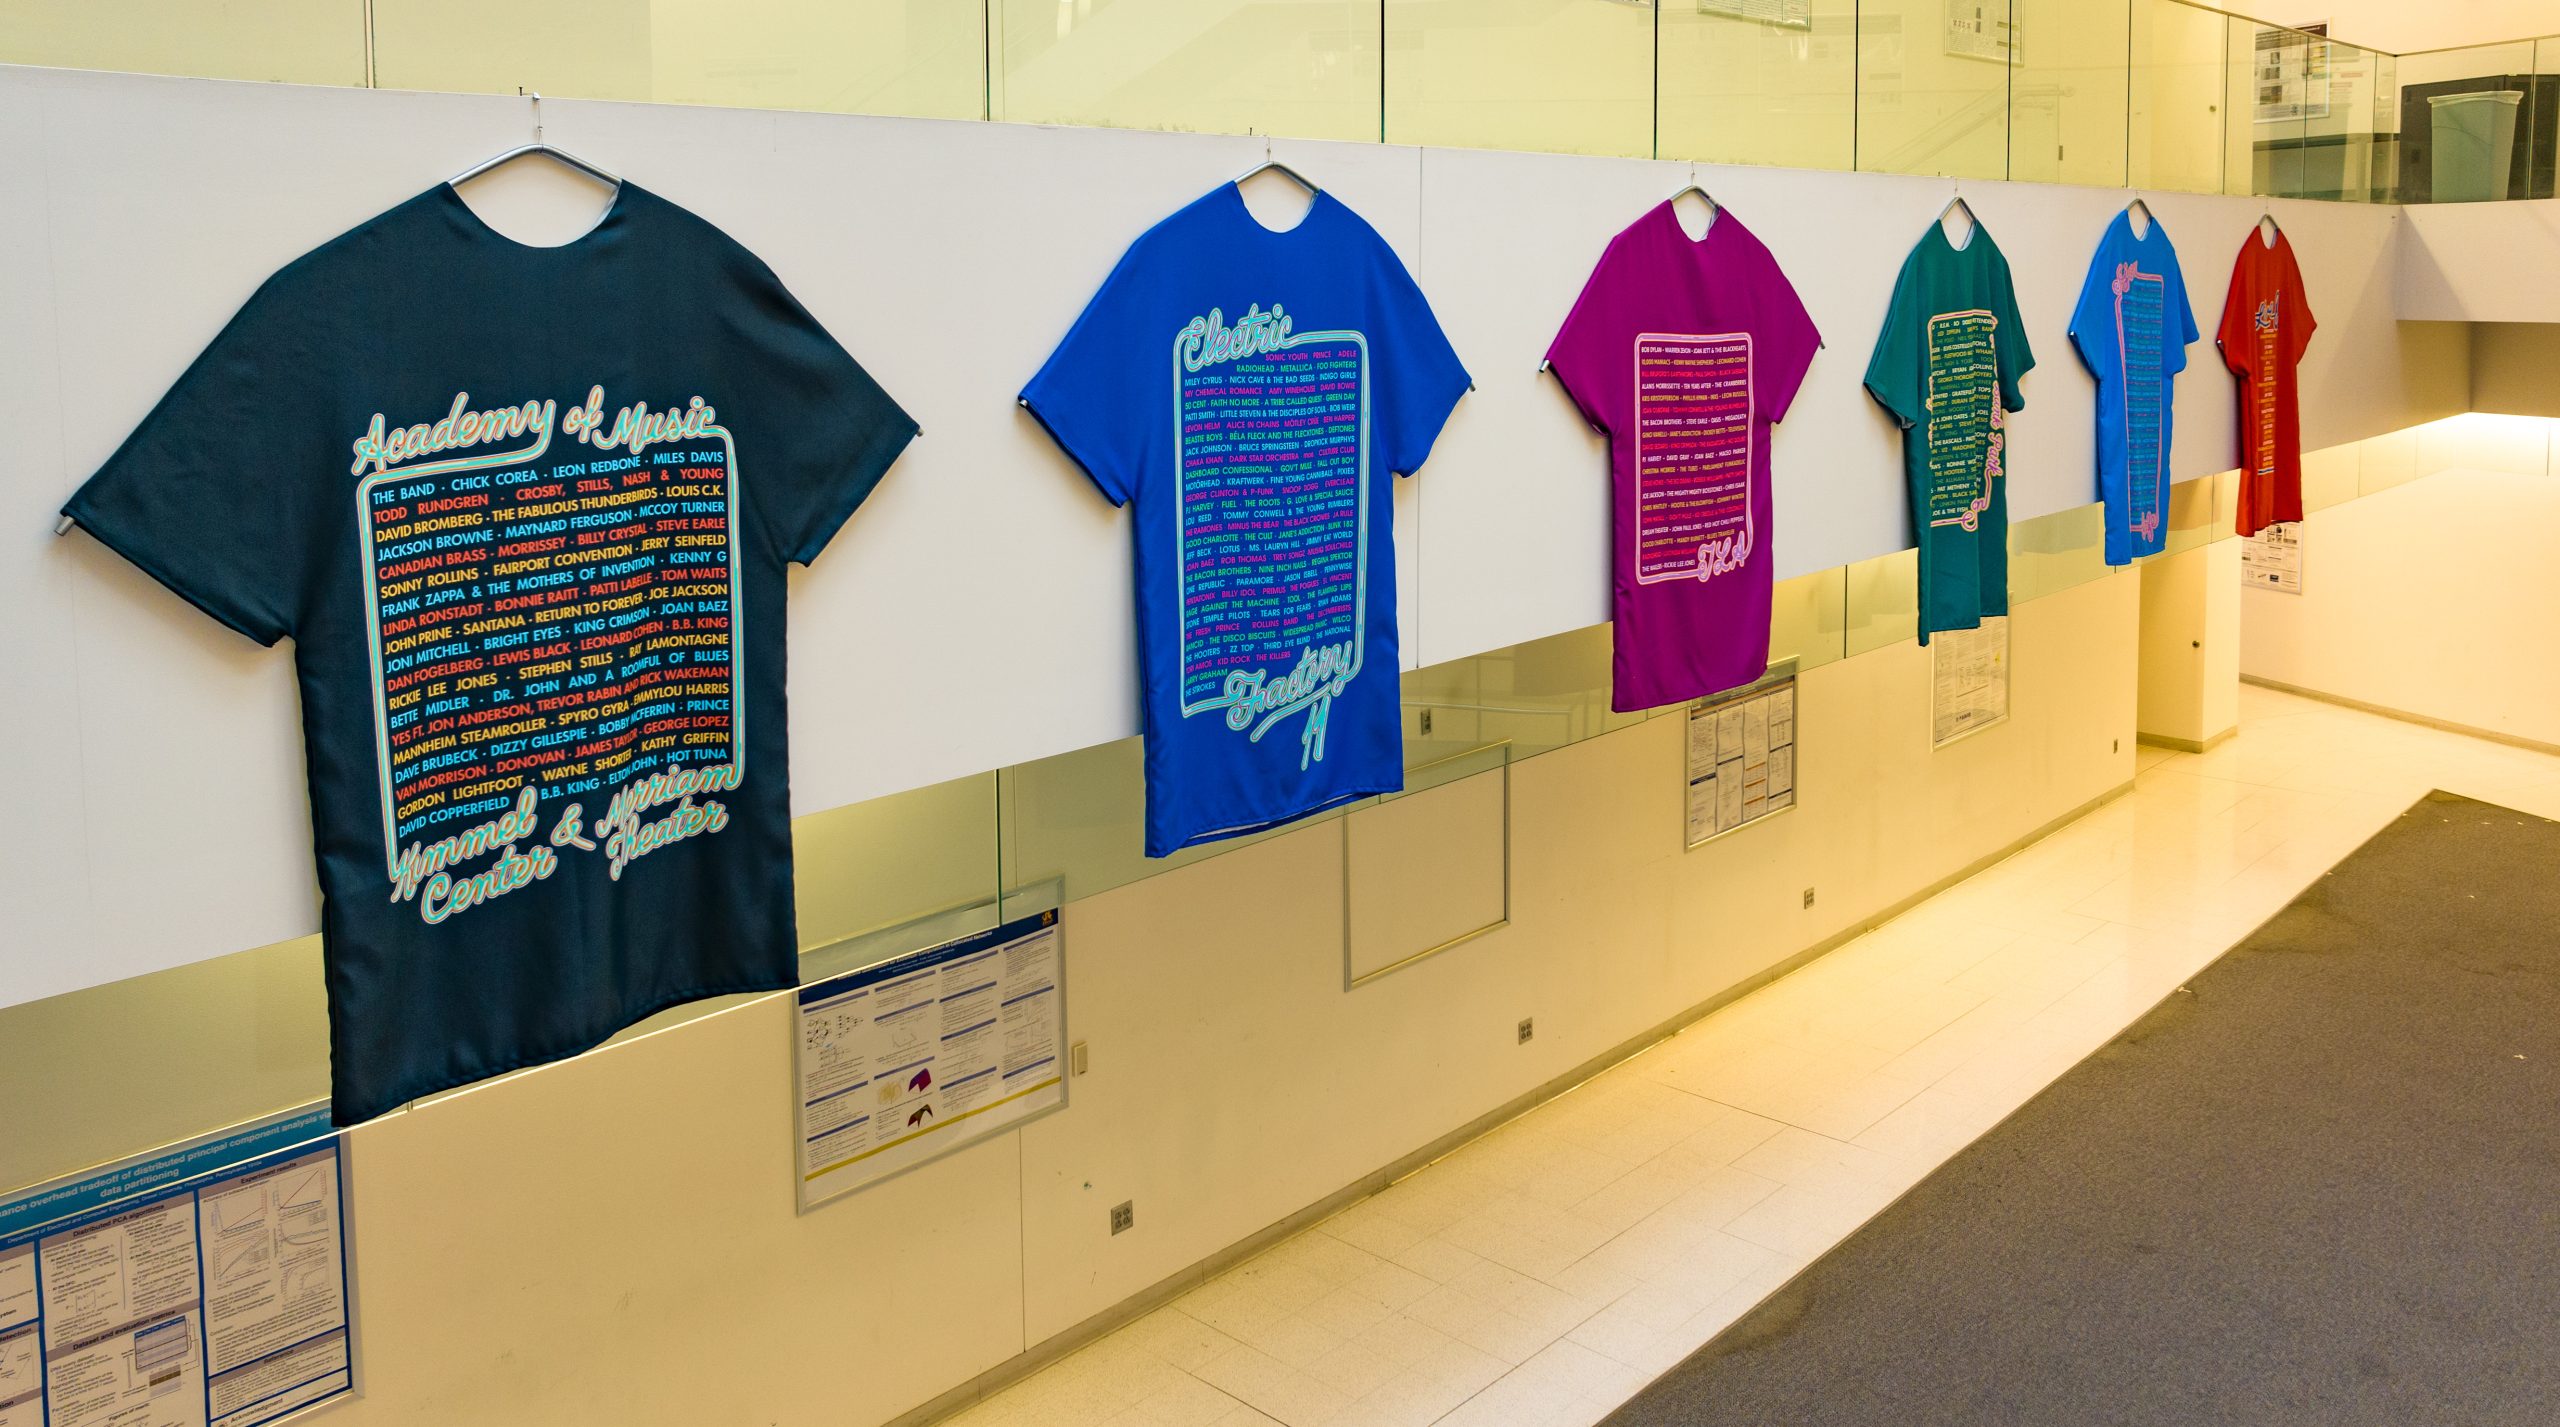 Electrified: 50 Years of Electric Factory custom-sewn giant t-shirts as wide format fabric banners